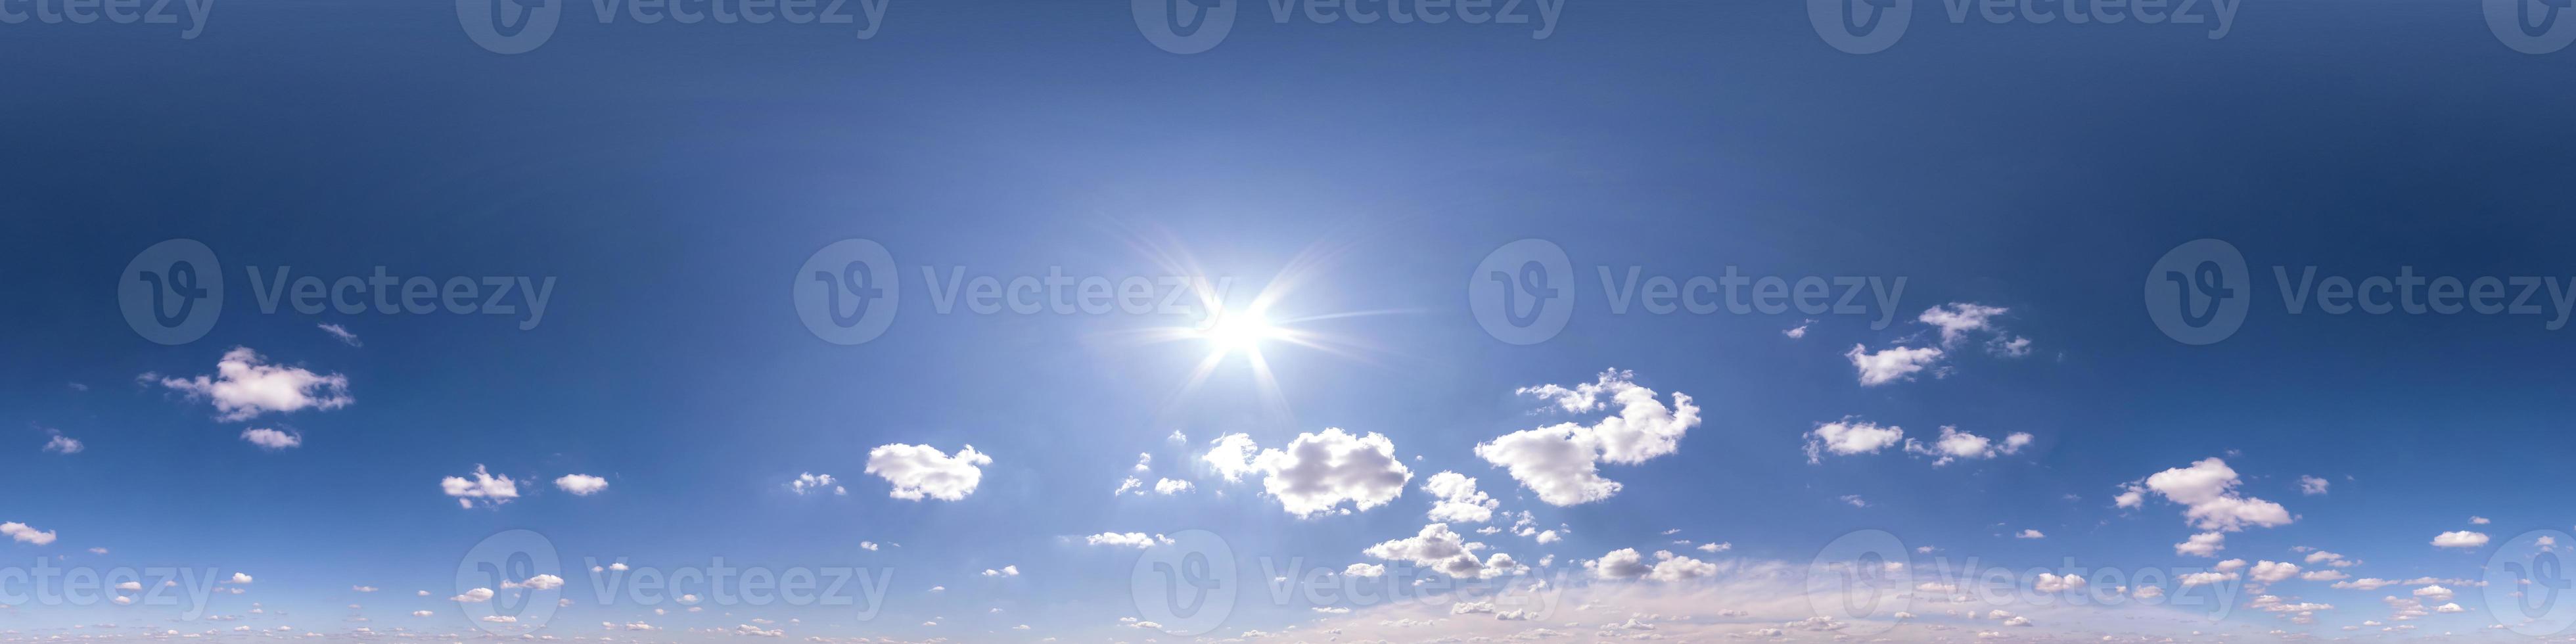 clear blue sky with white clouds without ground. Seamless hdri panorama 360 degrees angle view for use in 3d graphics or game development as sky dome or edit drone shot photo